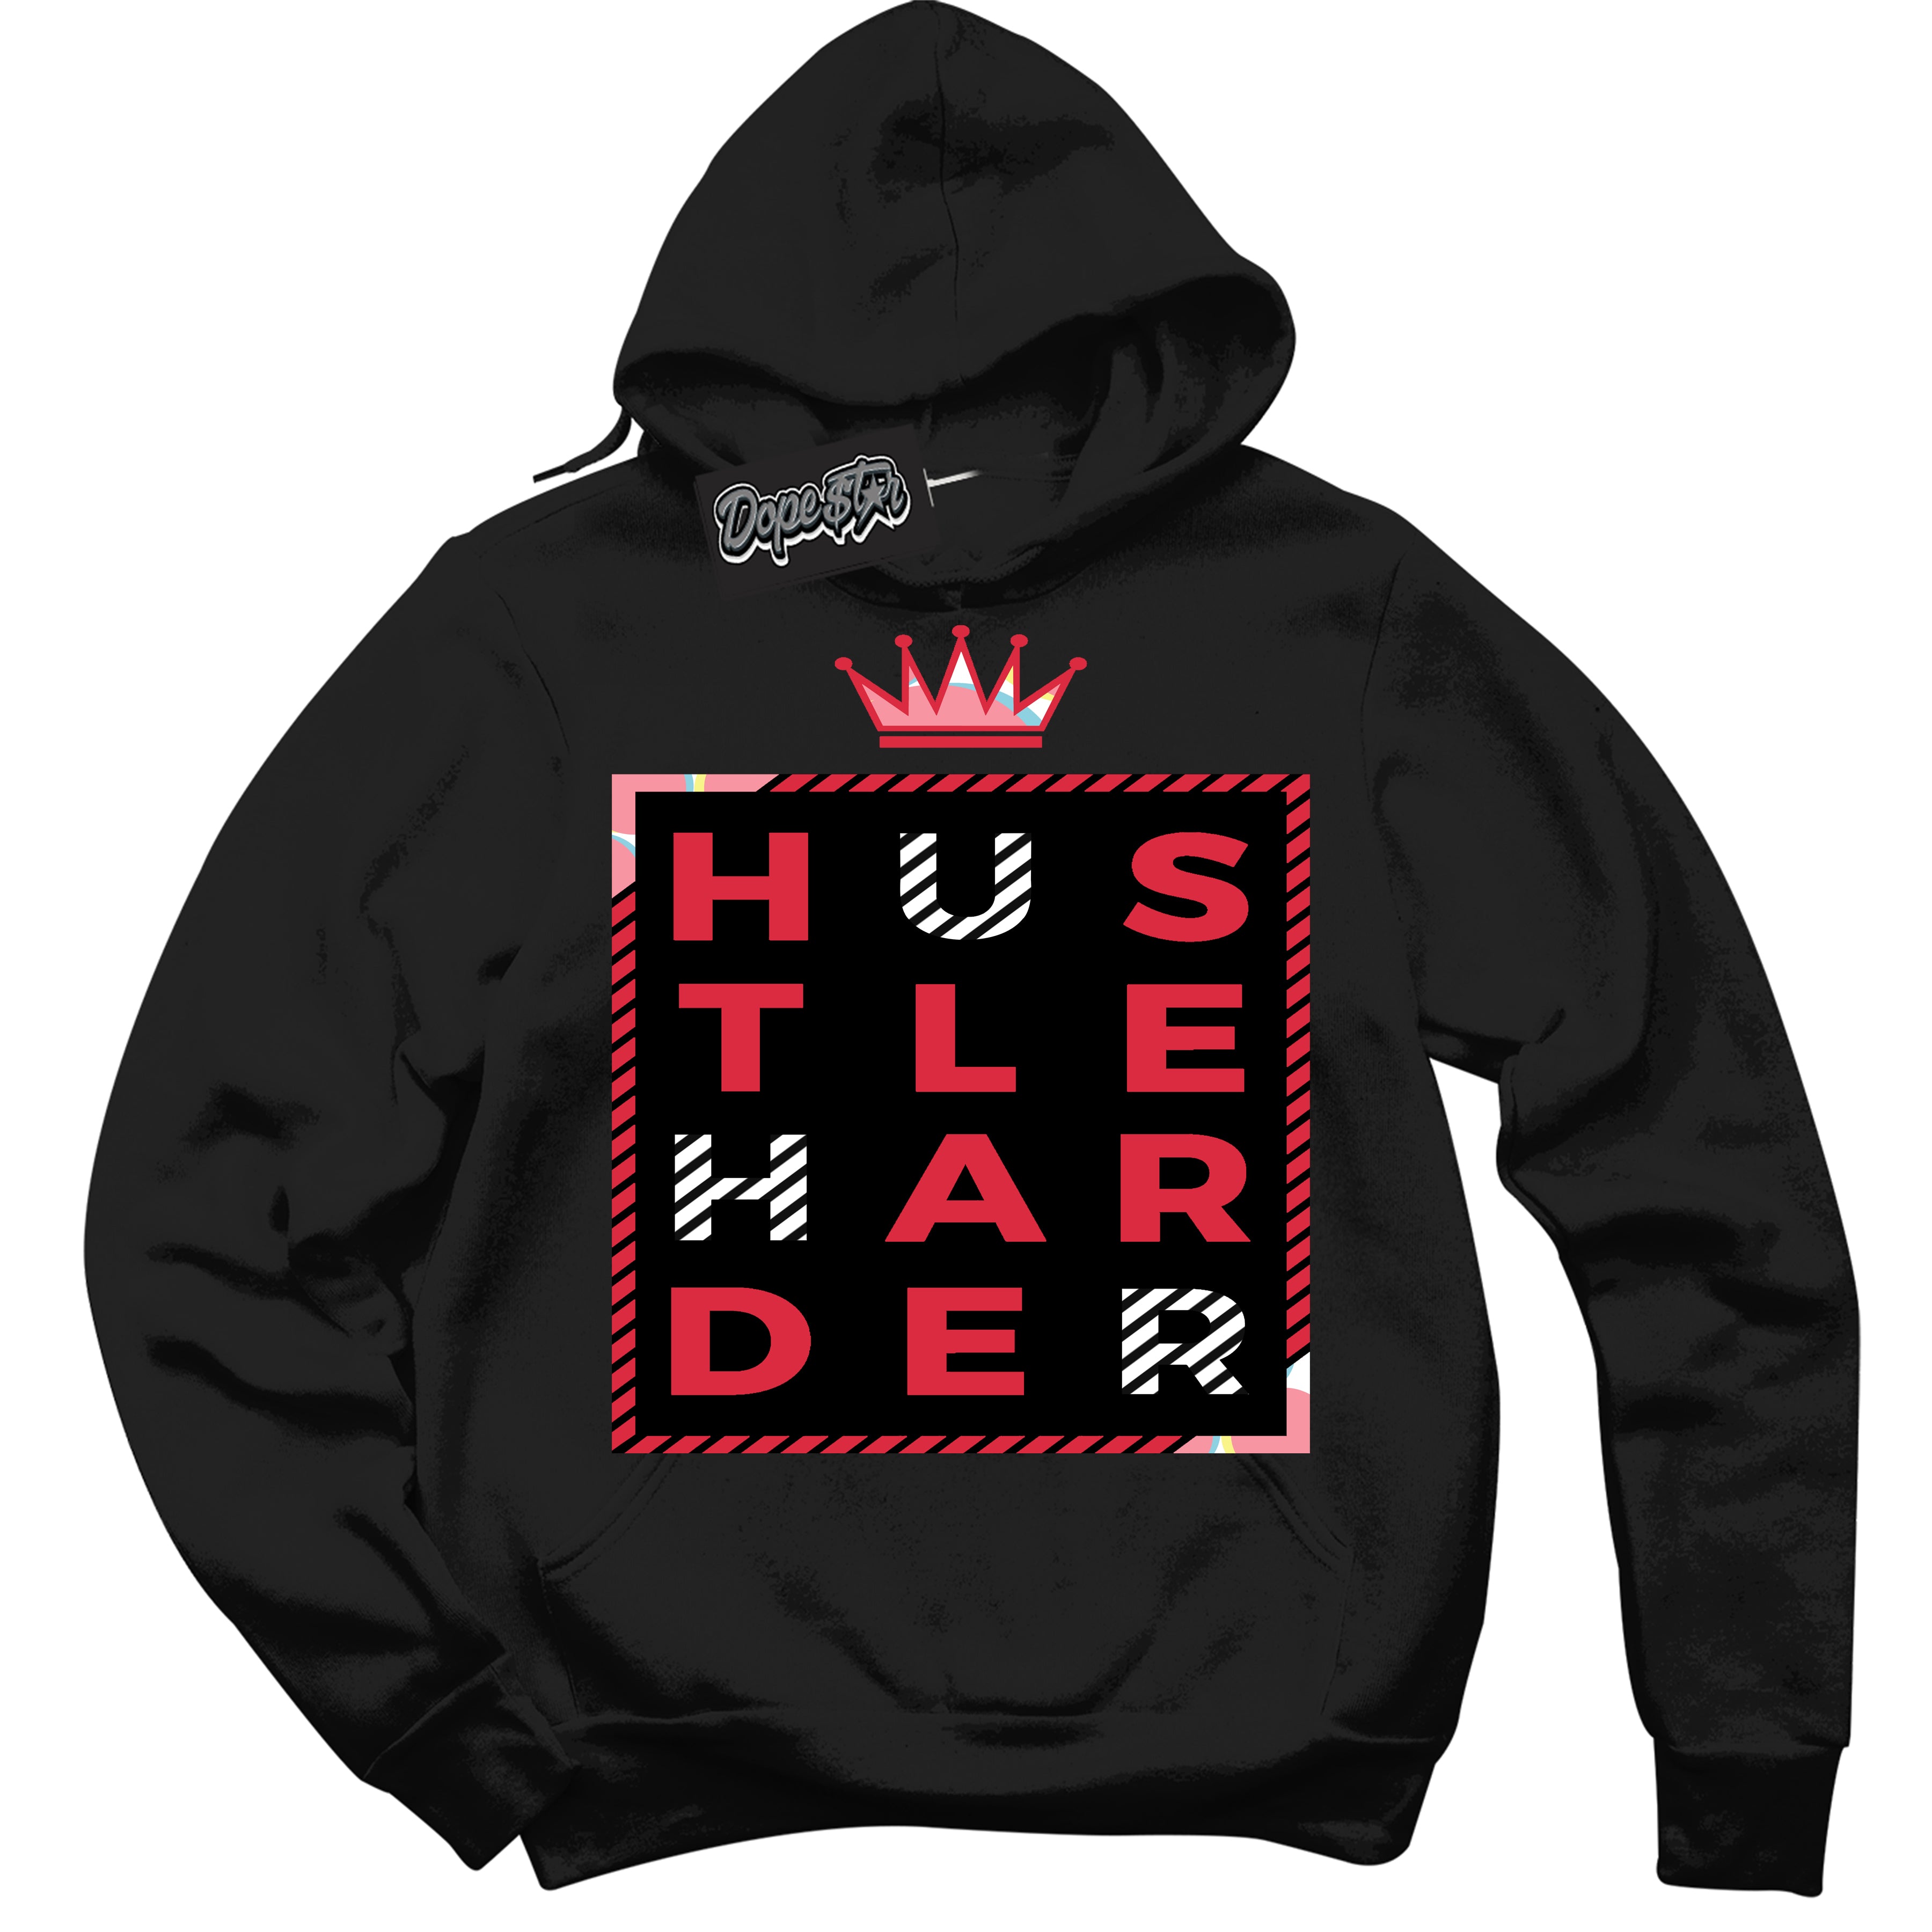 Cool Black Graphic DopeStar Hoodie with “ Hustle Harder “ print, that perfectly matches Spider-Verse 1s sneakers